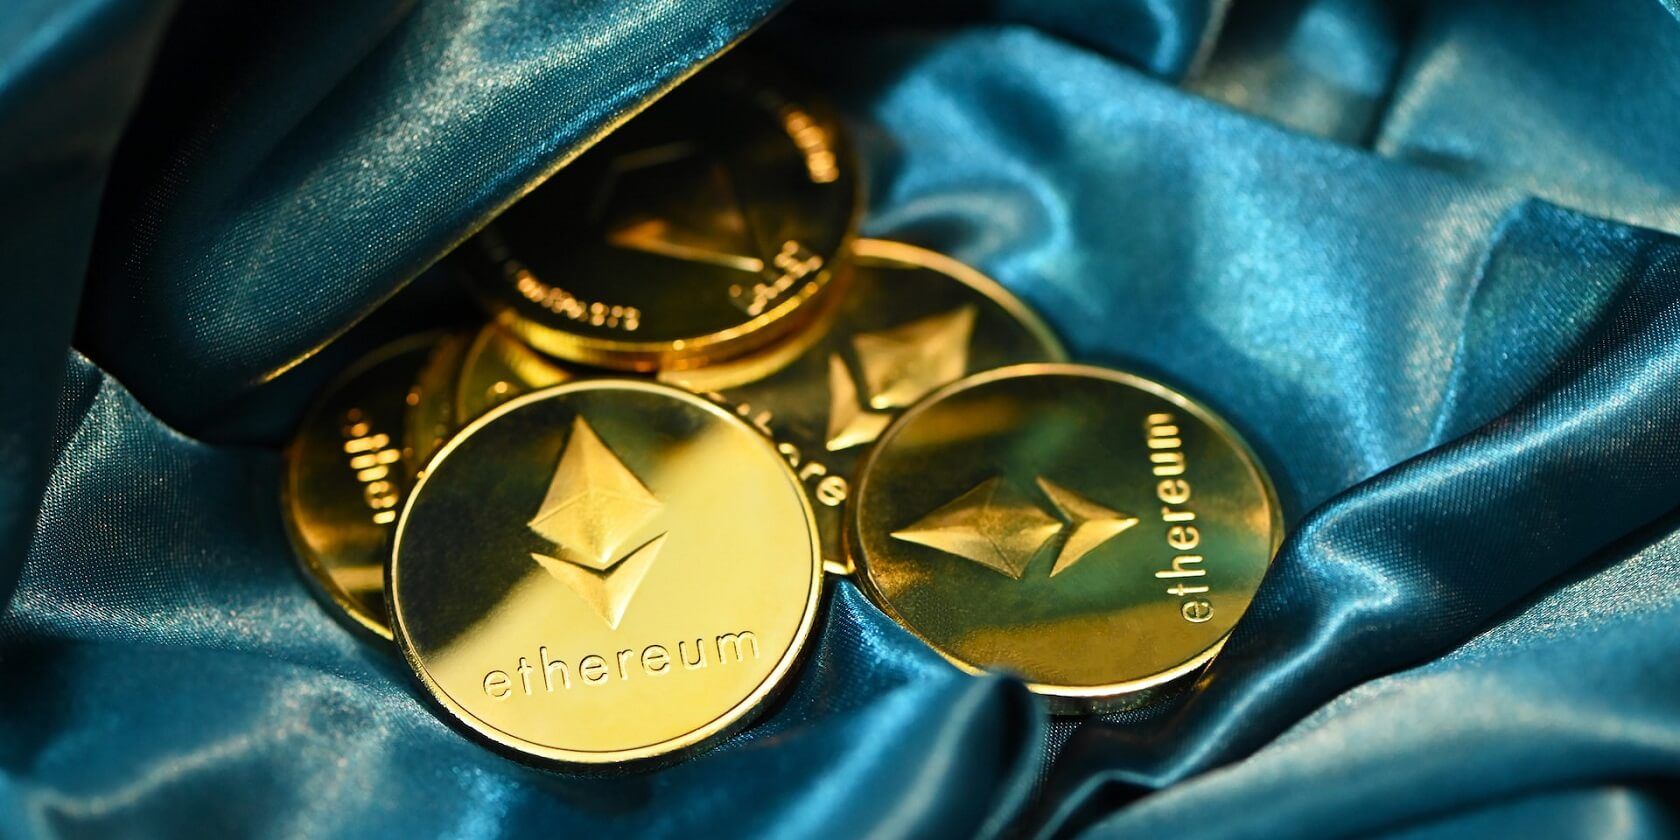 Ethereum coins on a blue fabric